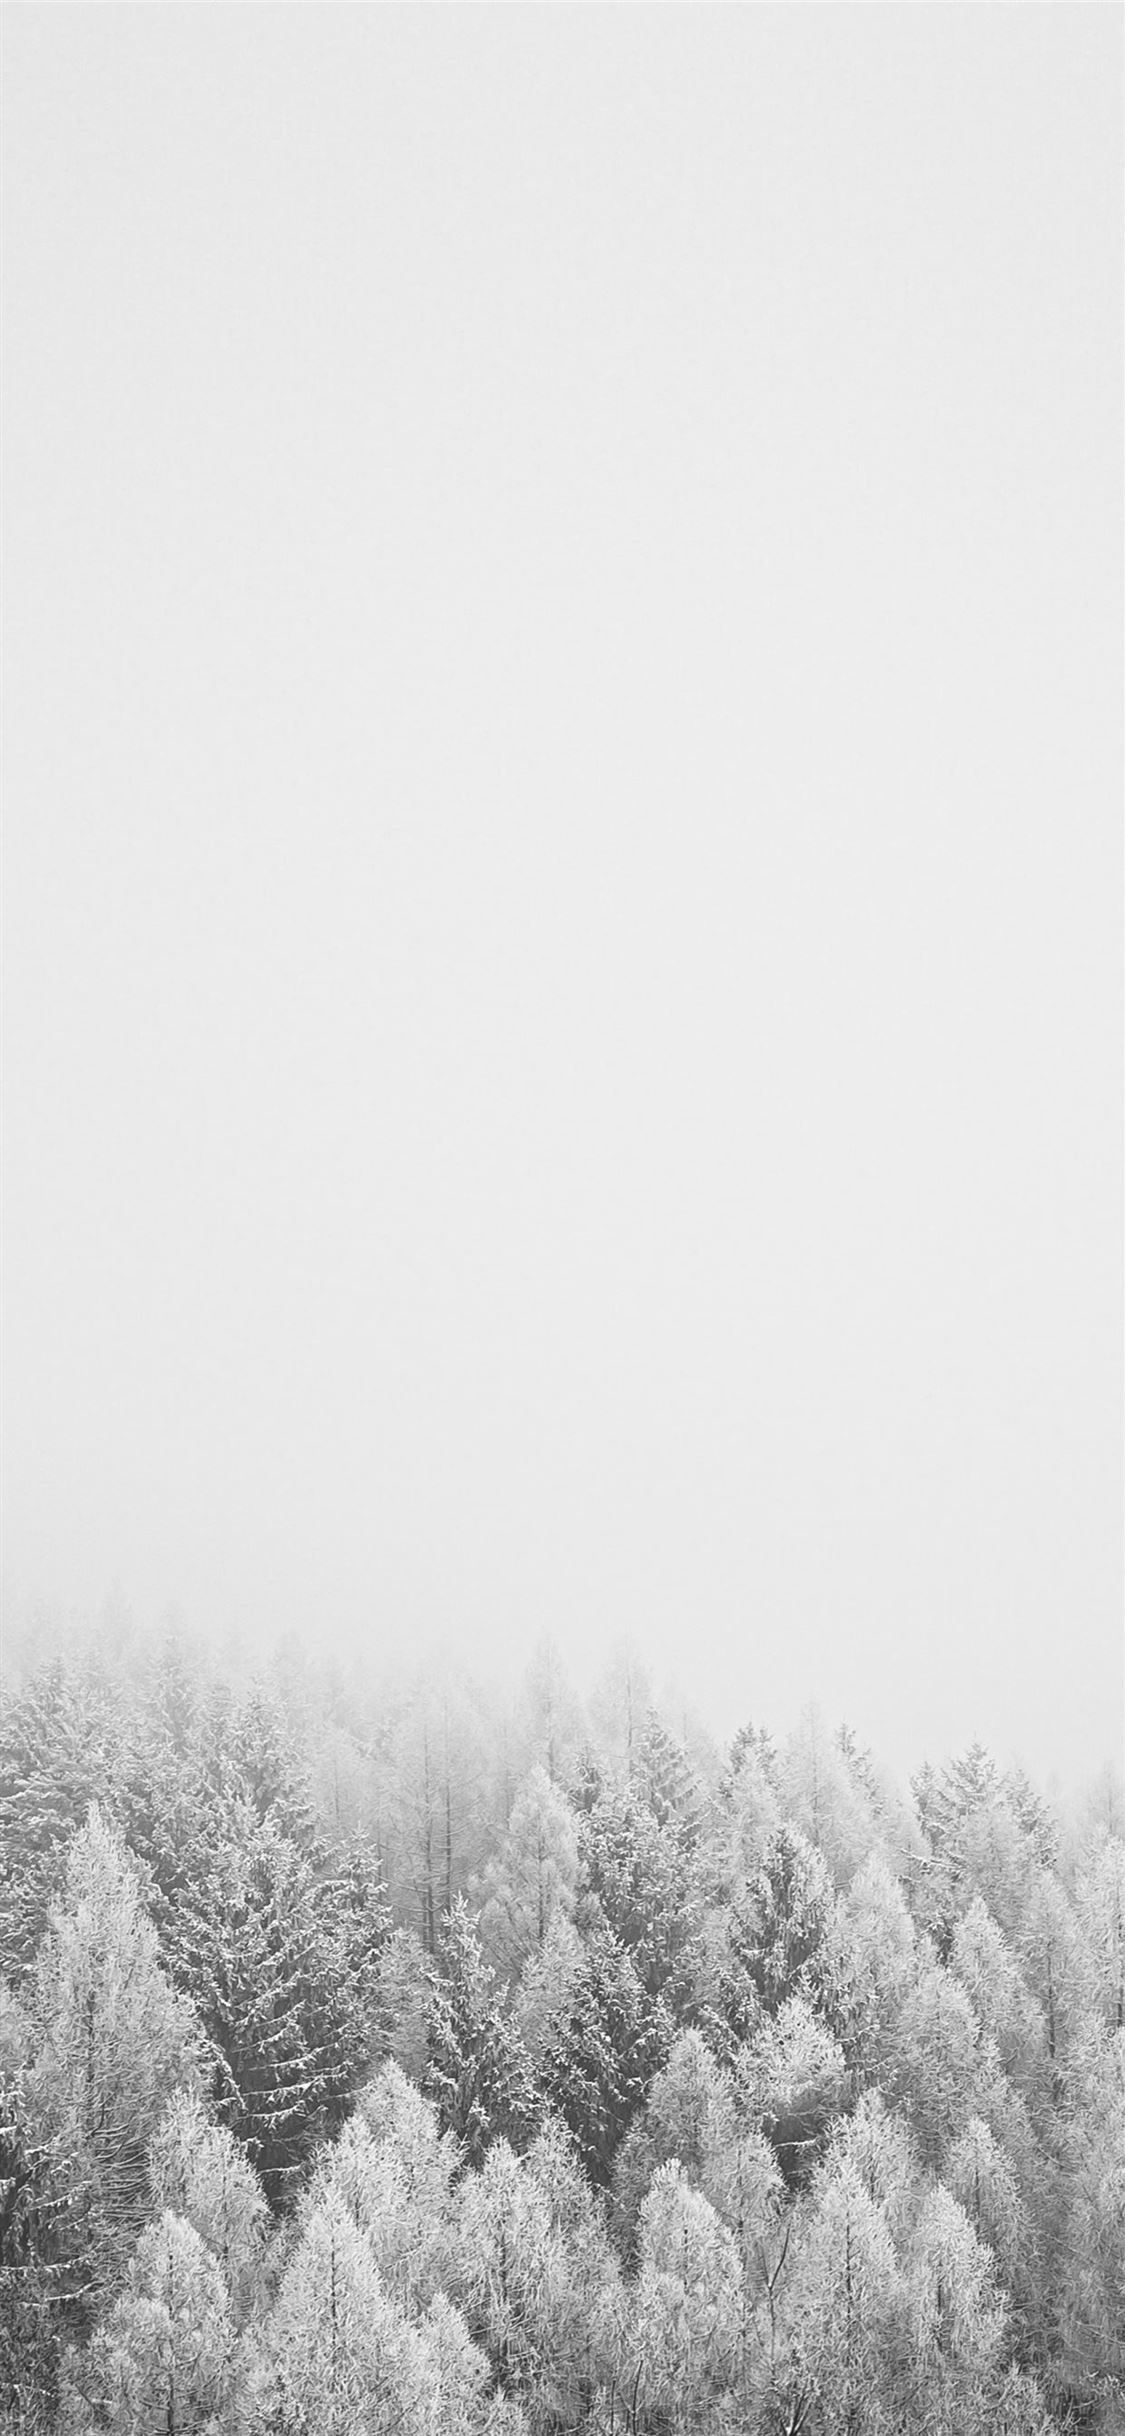 Snow Covered Trees During Daytime #grey #black And White #nature #tree #snow #iPhone11W. Snow Wallpaper Iphone, Black And White Wallpaper Iphone, Winter Wallpaper